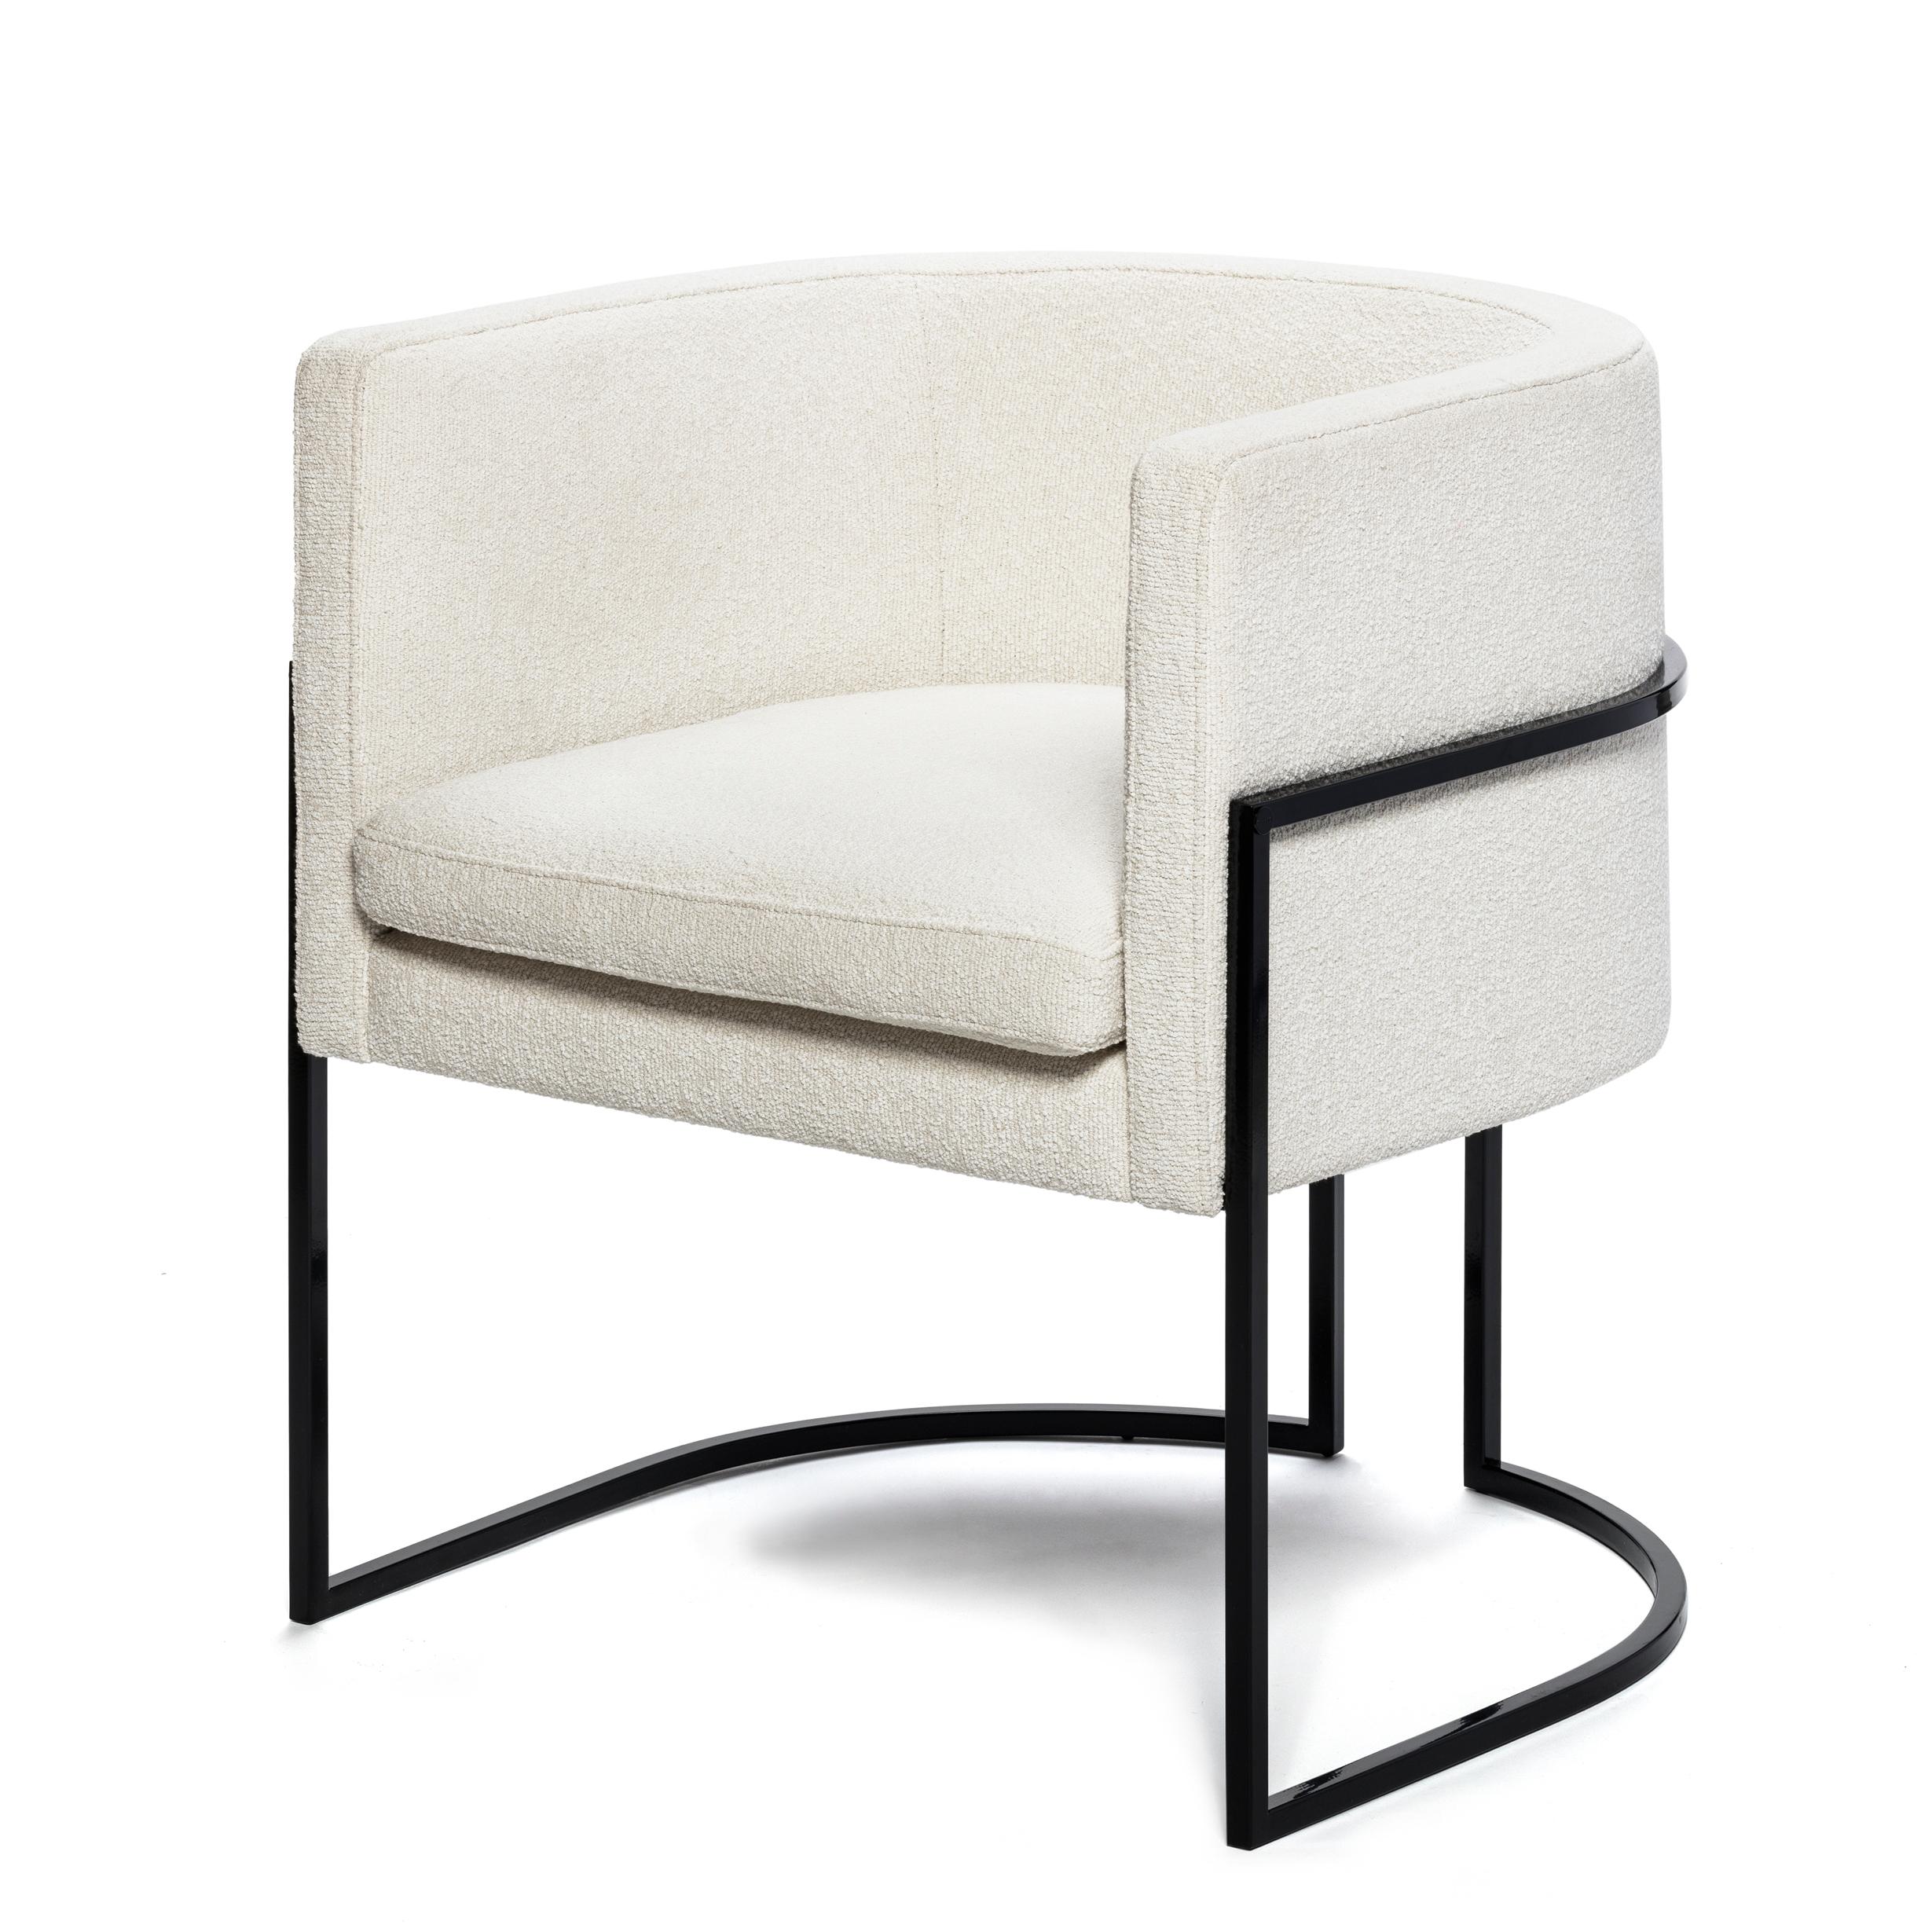 Iron Julius Chair by Duistt
Dimensions: W 62 x D 62 x H 71 cm
Materials: Duistt Fabric and HG Lacquered Iron

The JULIUS stainless steel chair, crafted with great attention to detail, gives us clean and modern lines always with a strong